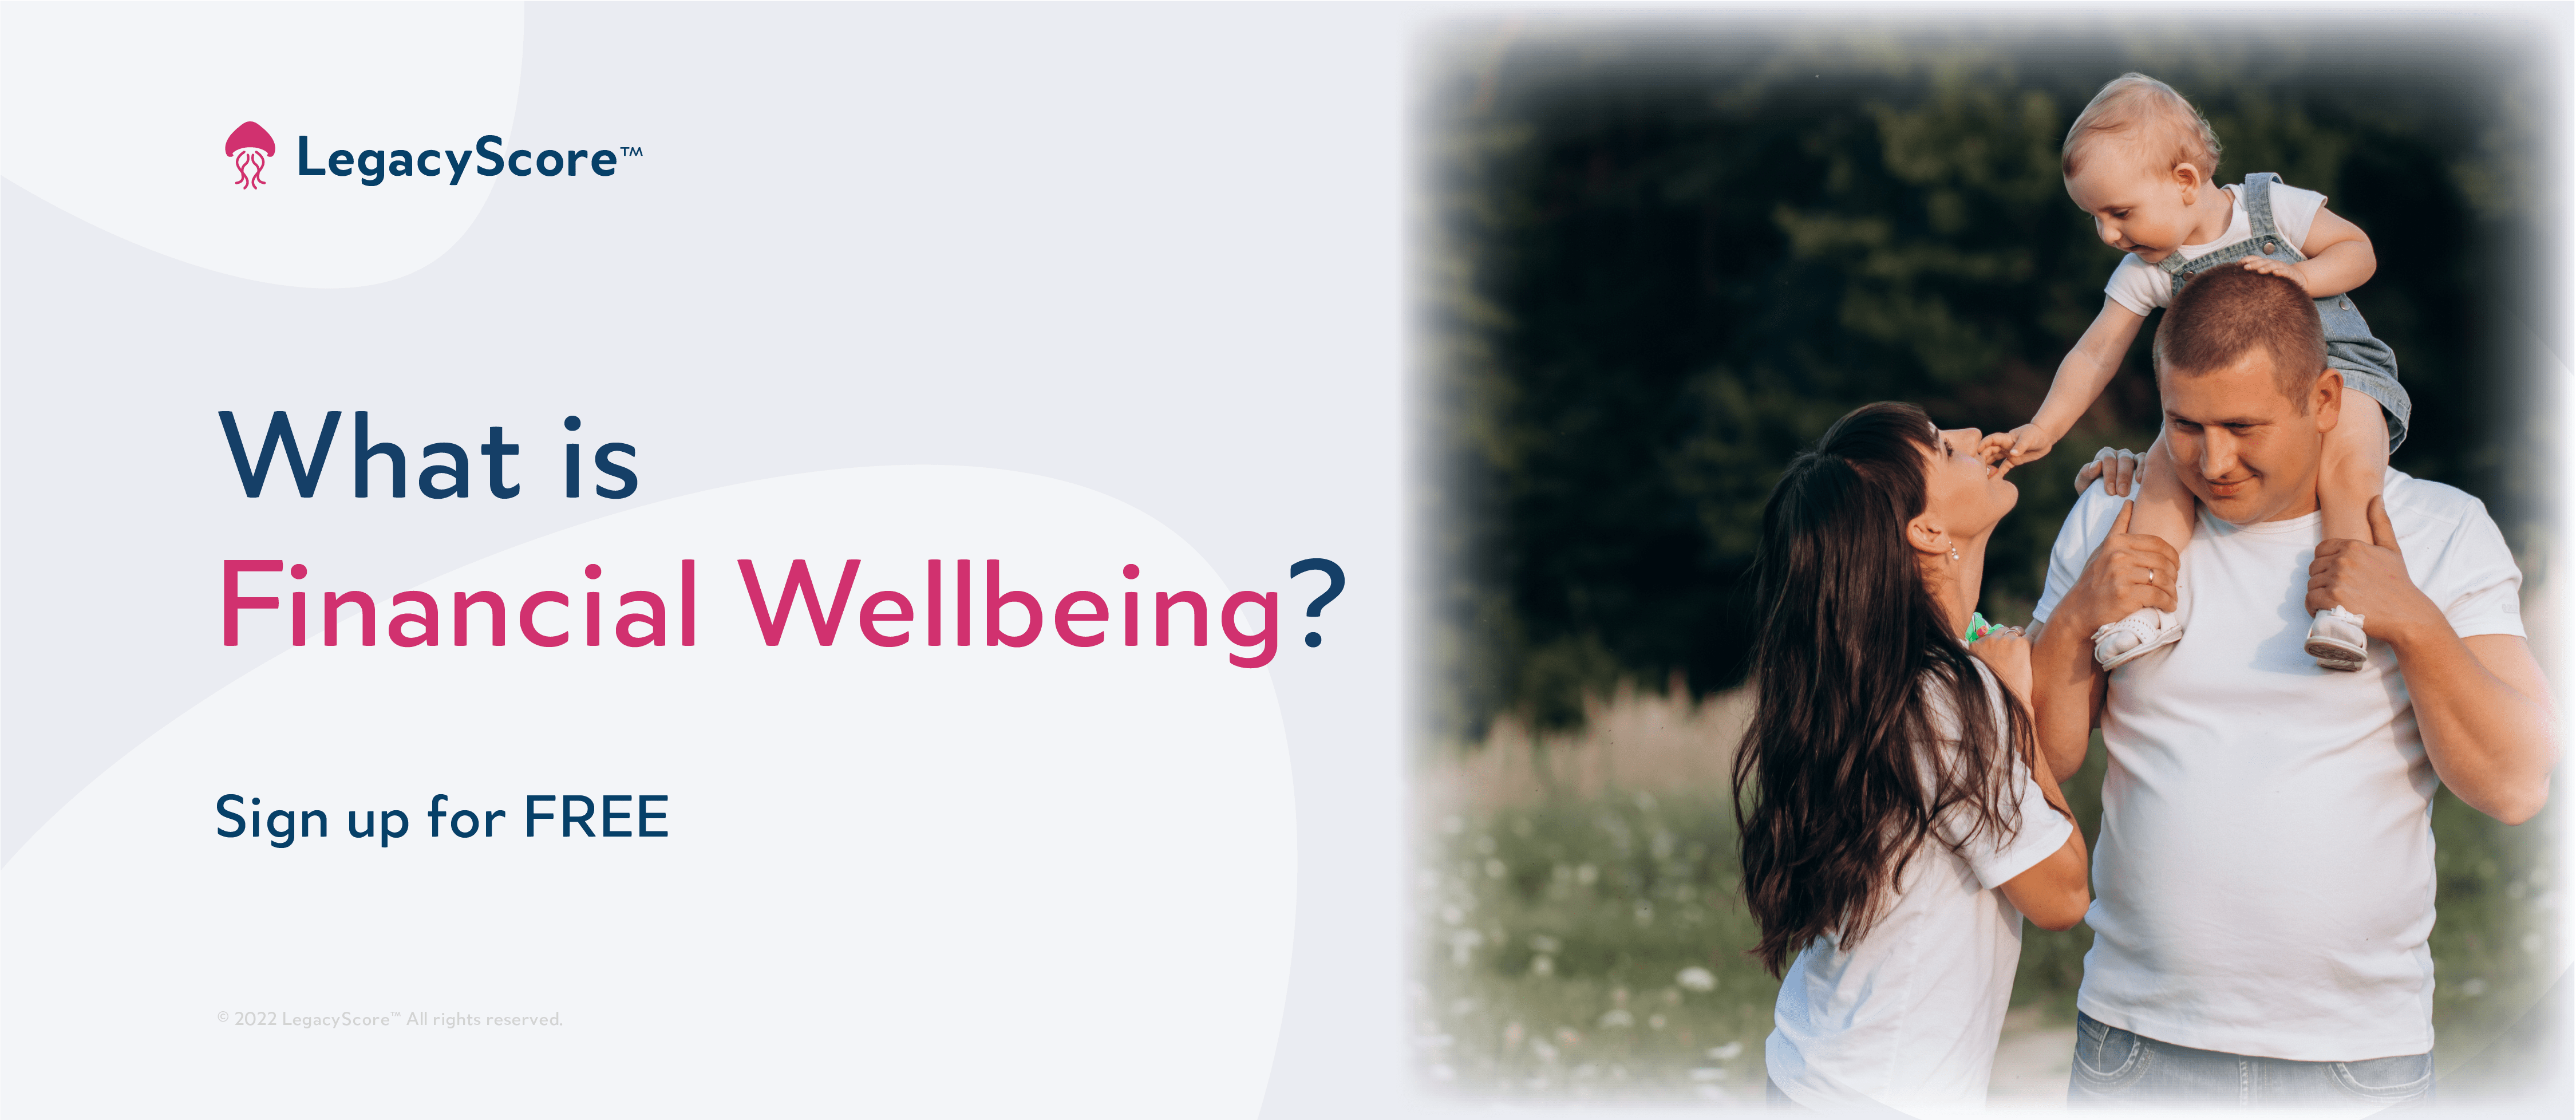 What is Financial Wellbeing?